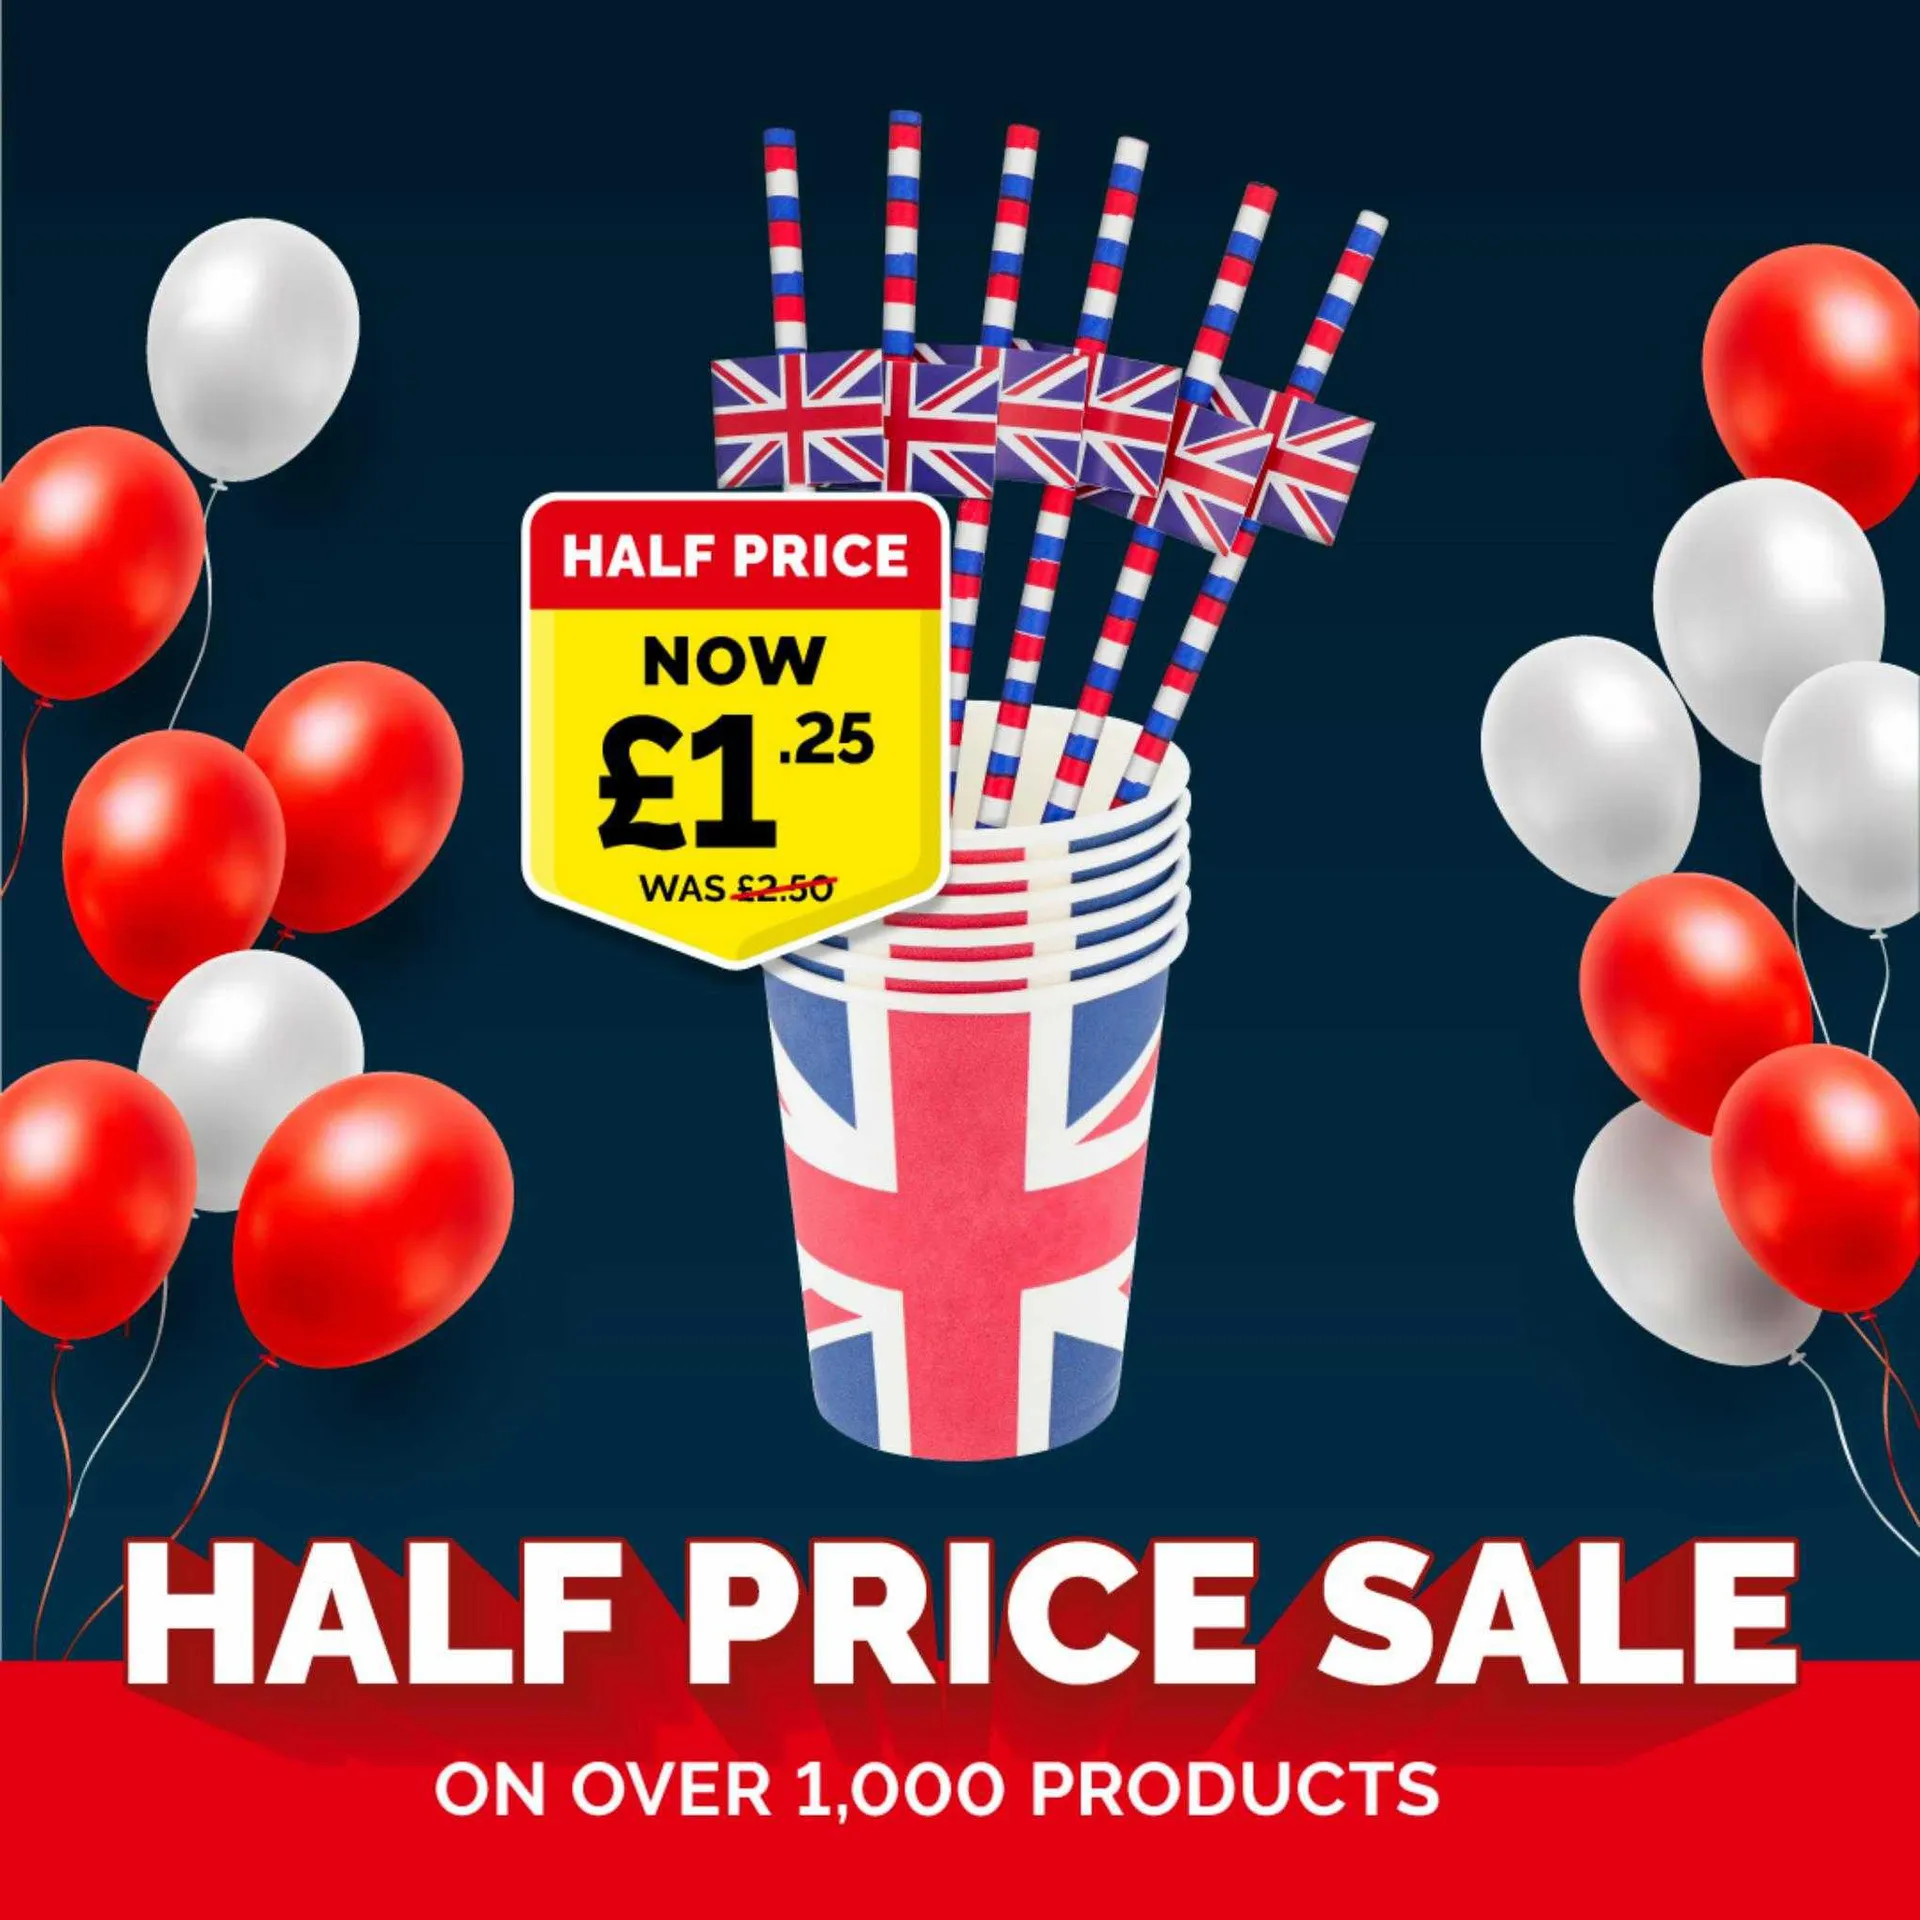 Poundstretcher Weekly Offers - 7